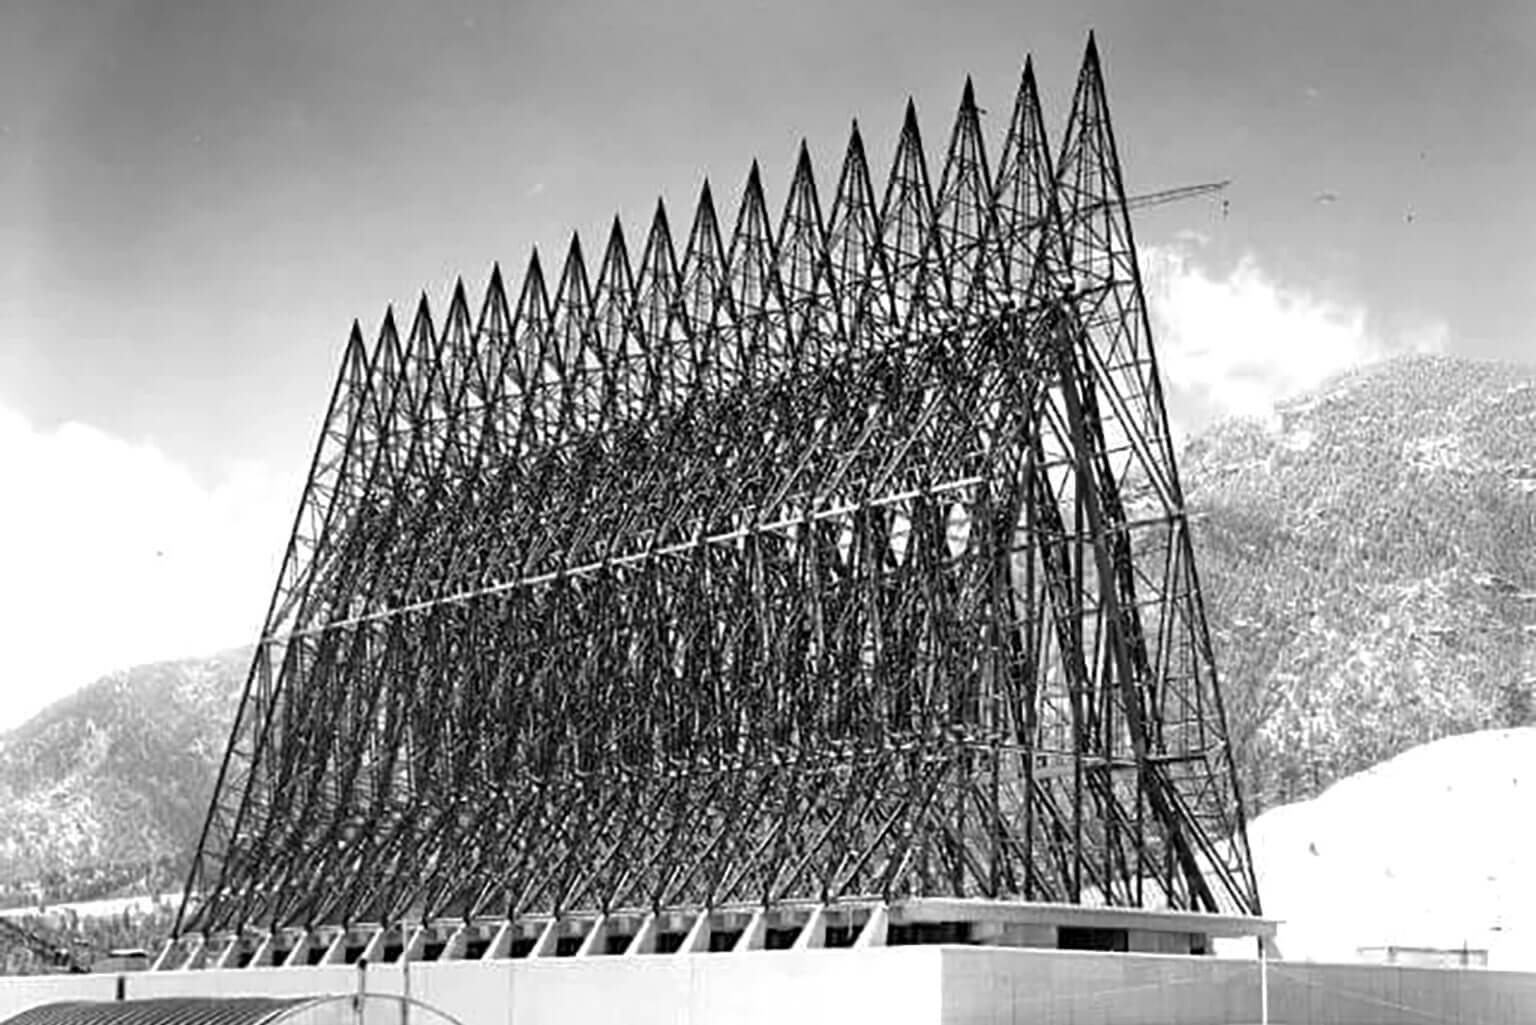 A view of the newly erected metal structure of the U.S. Air Force Academy Cadet Chapel during construction.